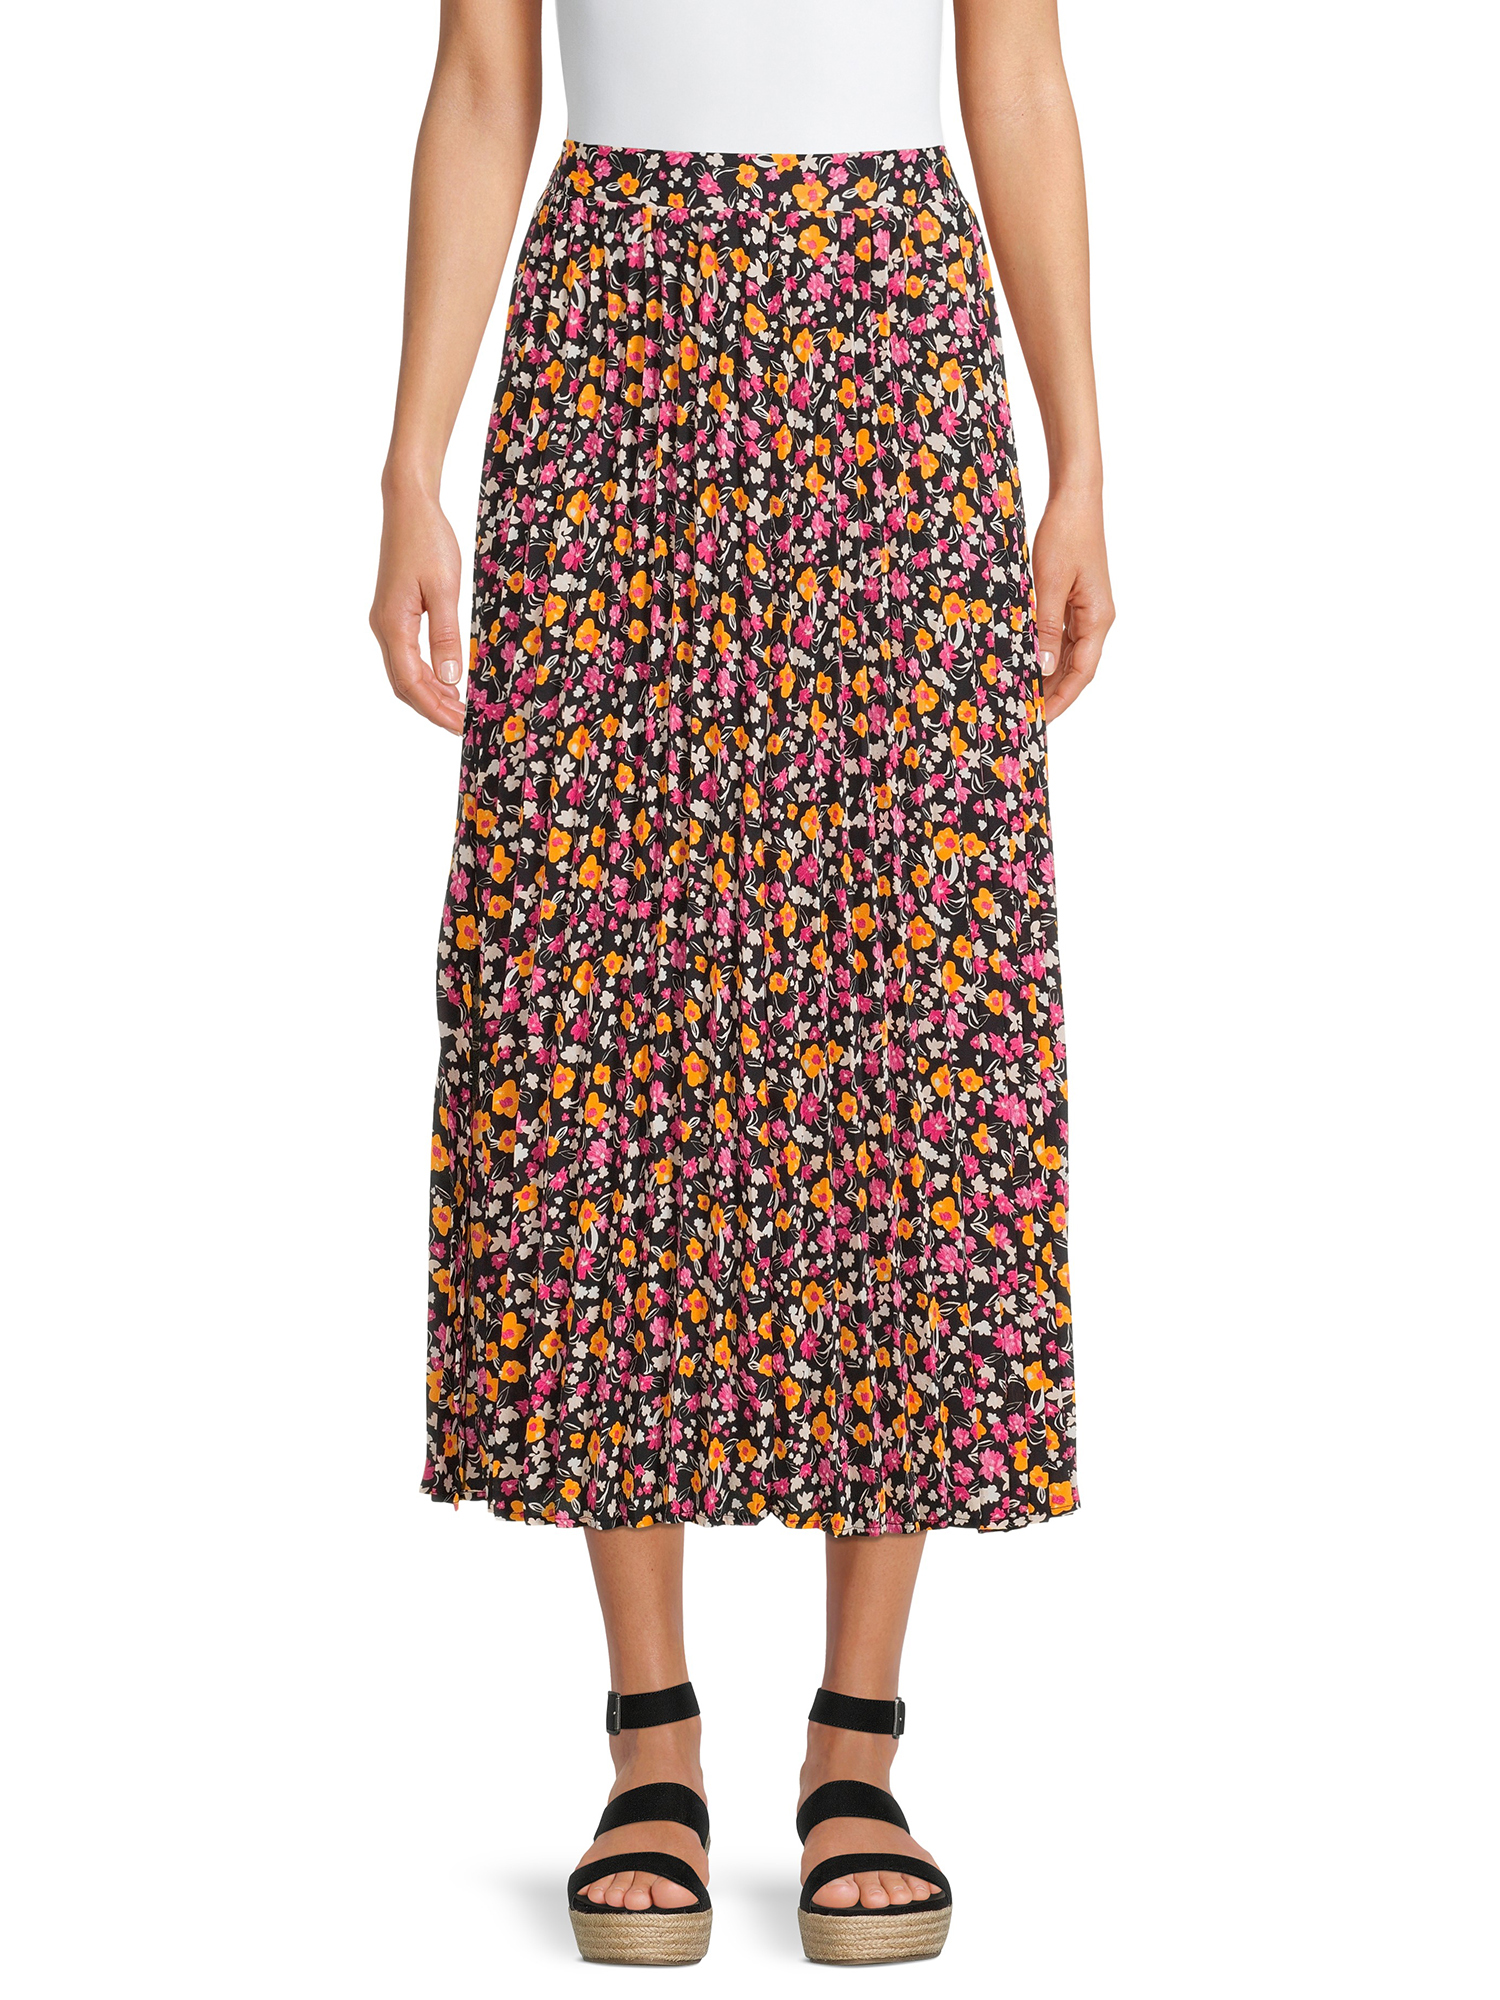 The Get Women's Pleated Maxi Skirt - image 1 of 5